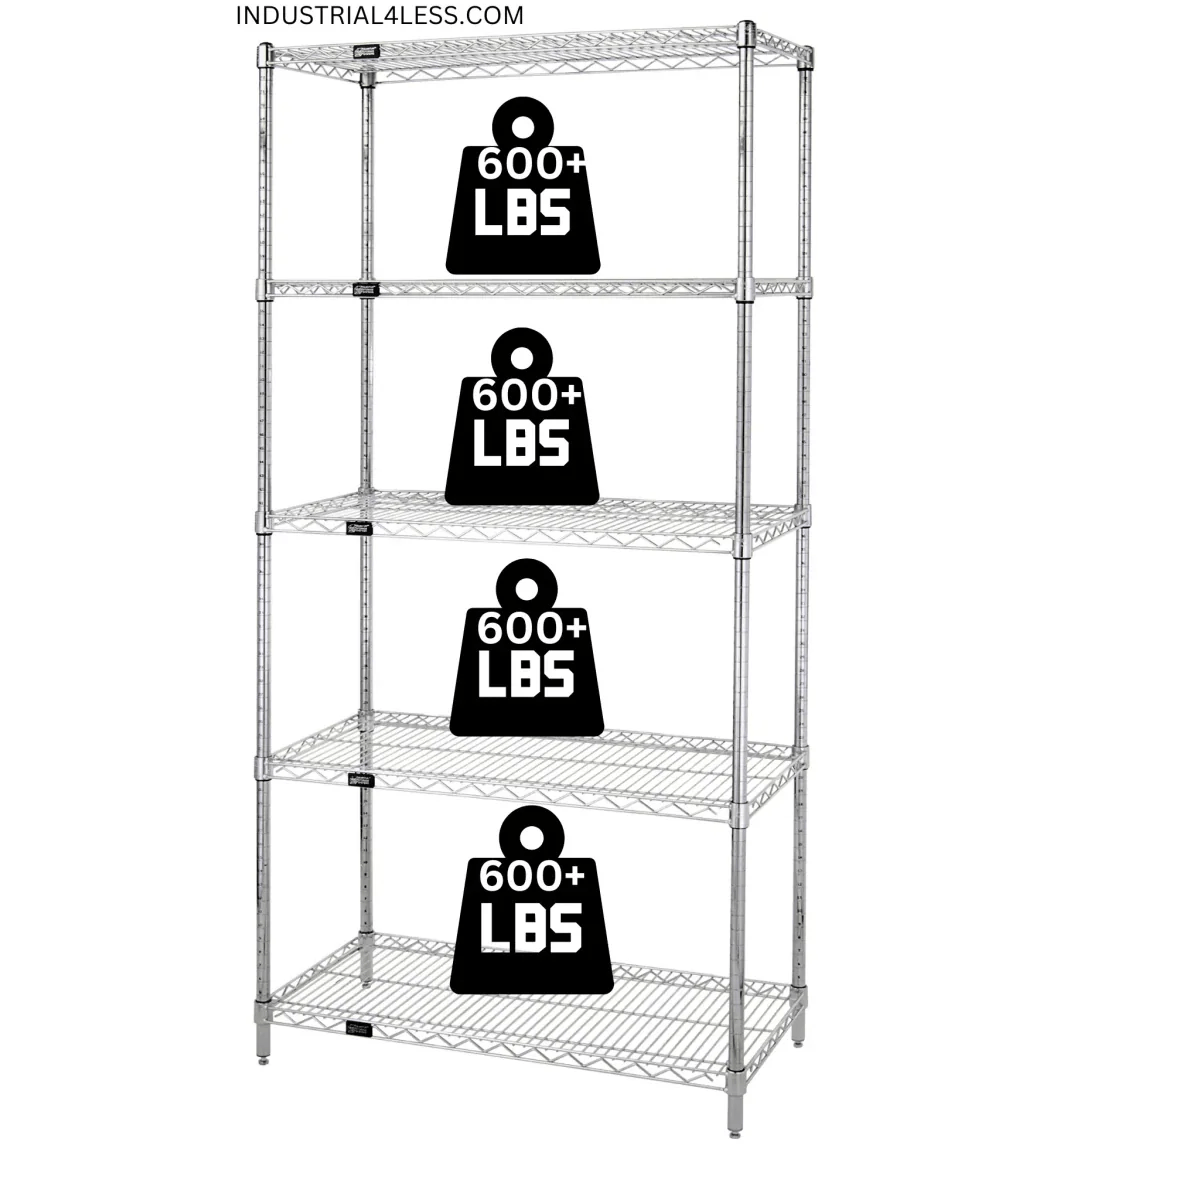 18" x 30" Stainless Steel Wire Shelving Unit - Industrial 4 Less - 18305S-5